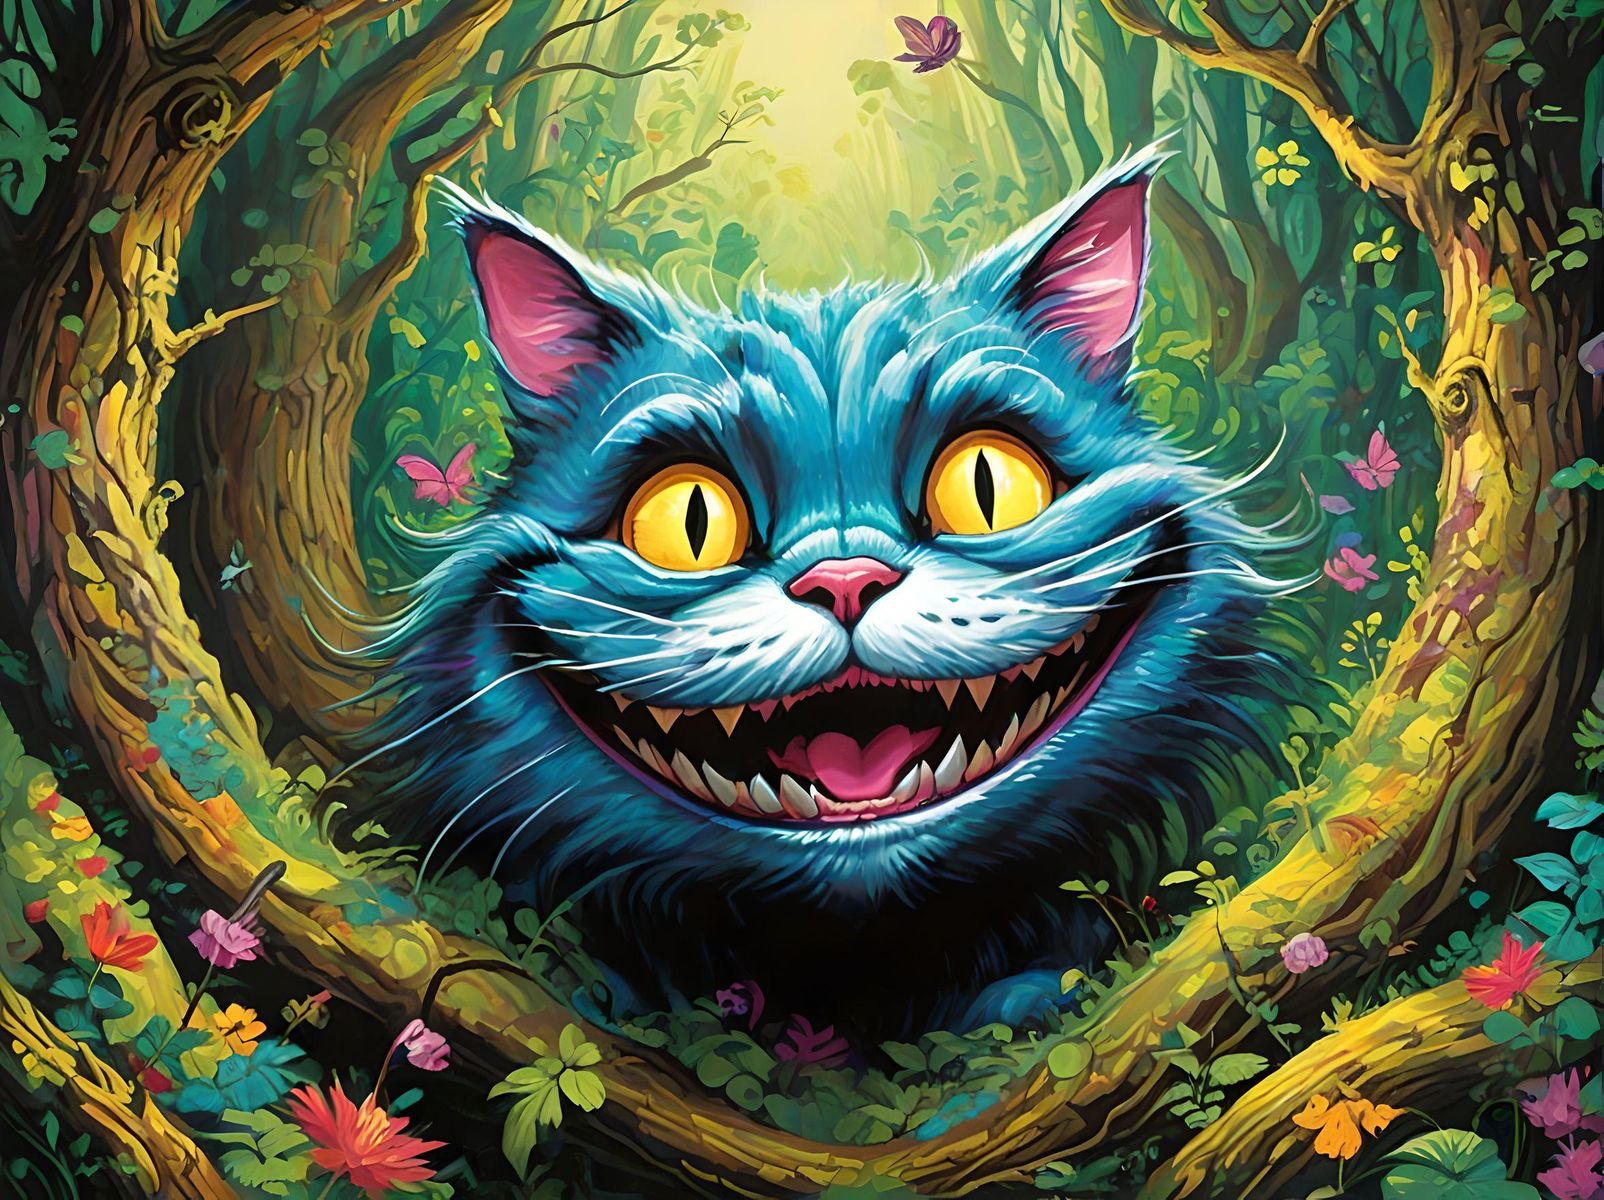 The Cheshire Cat grinned wickedly and floated through the forest